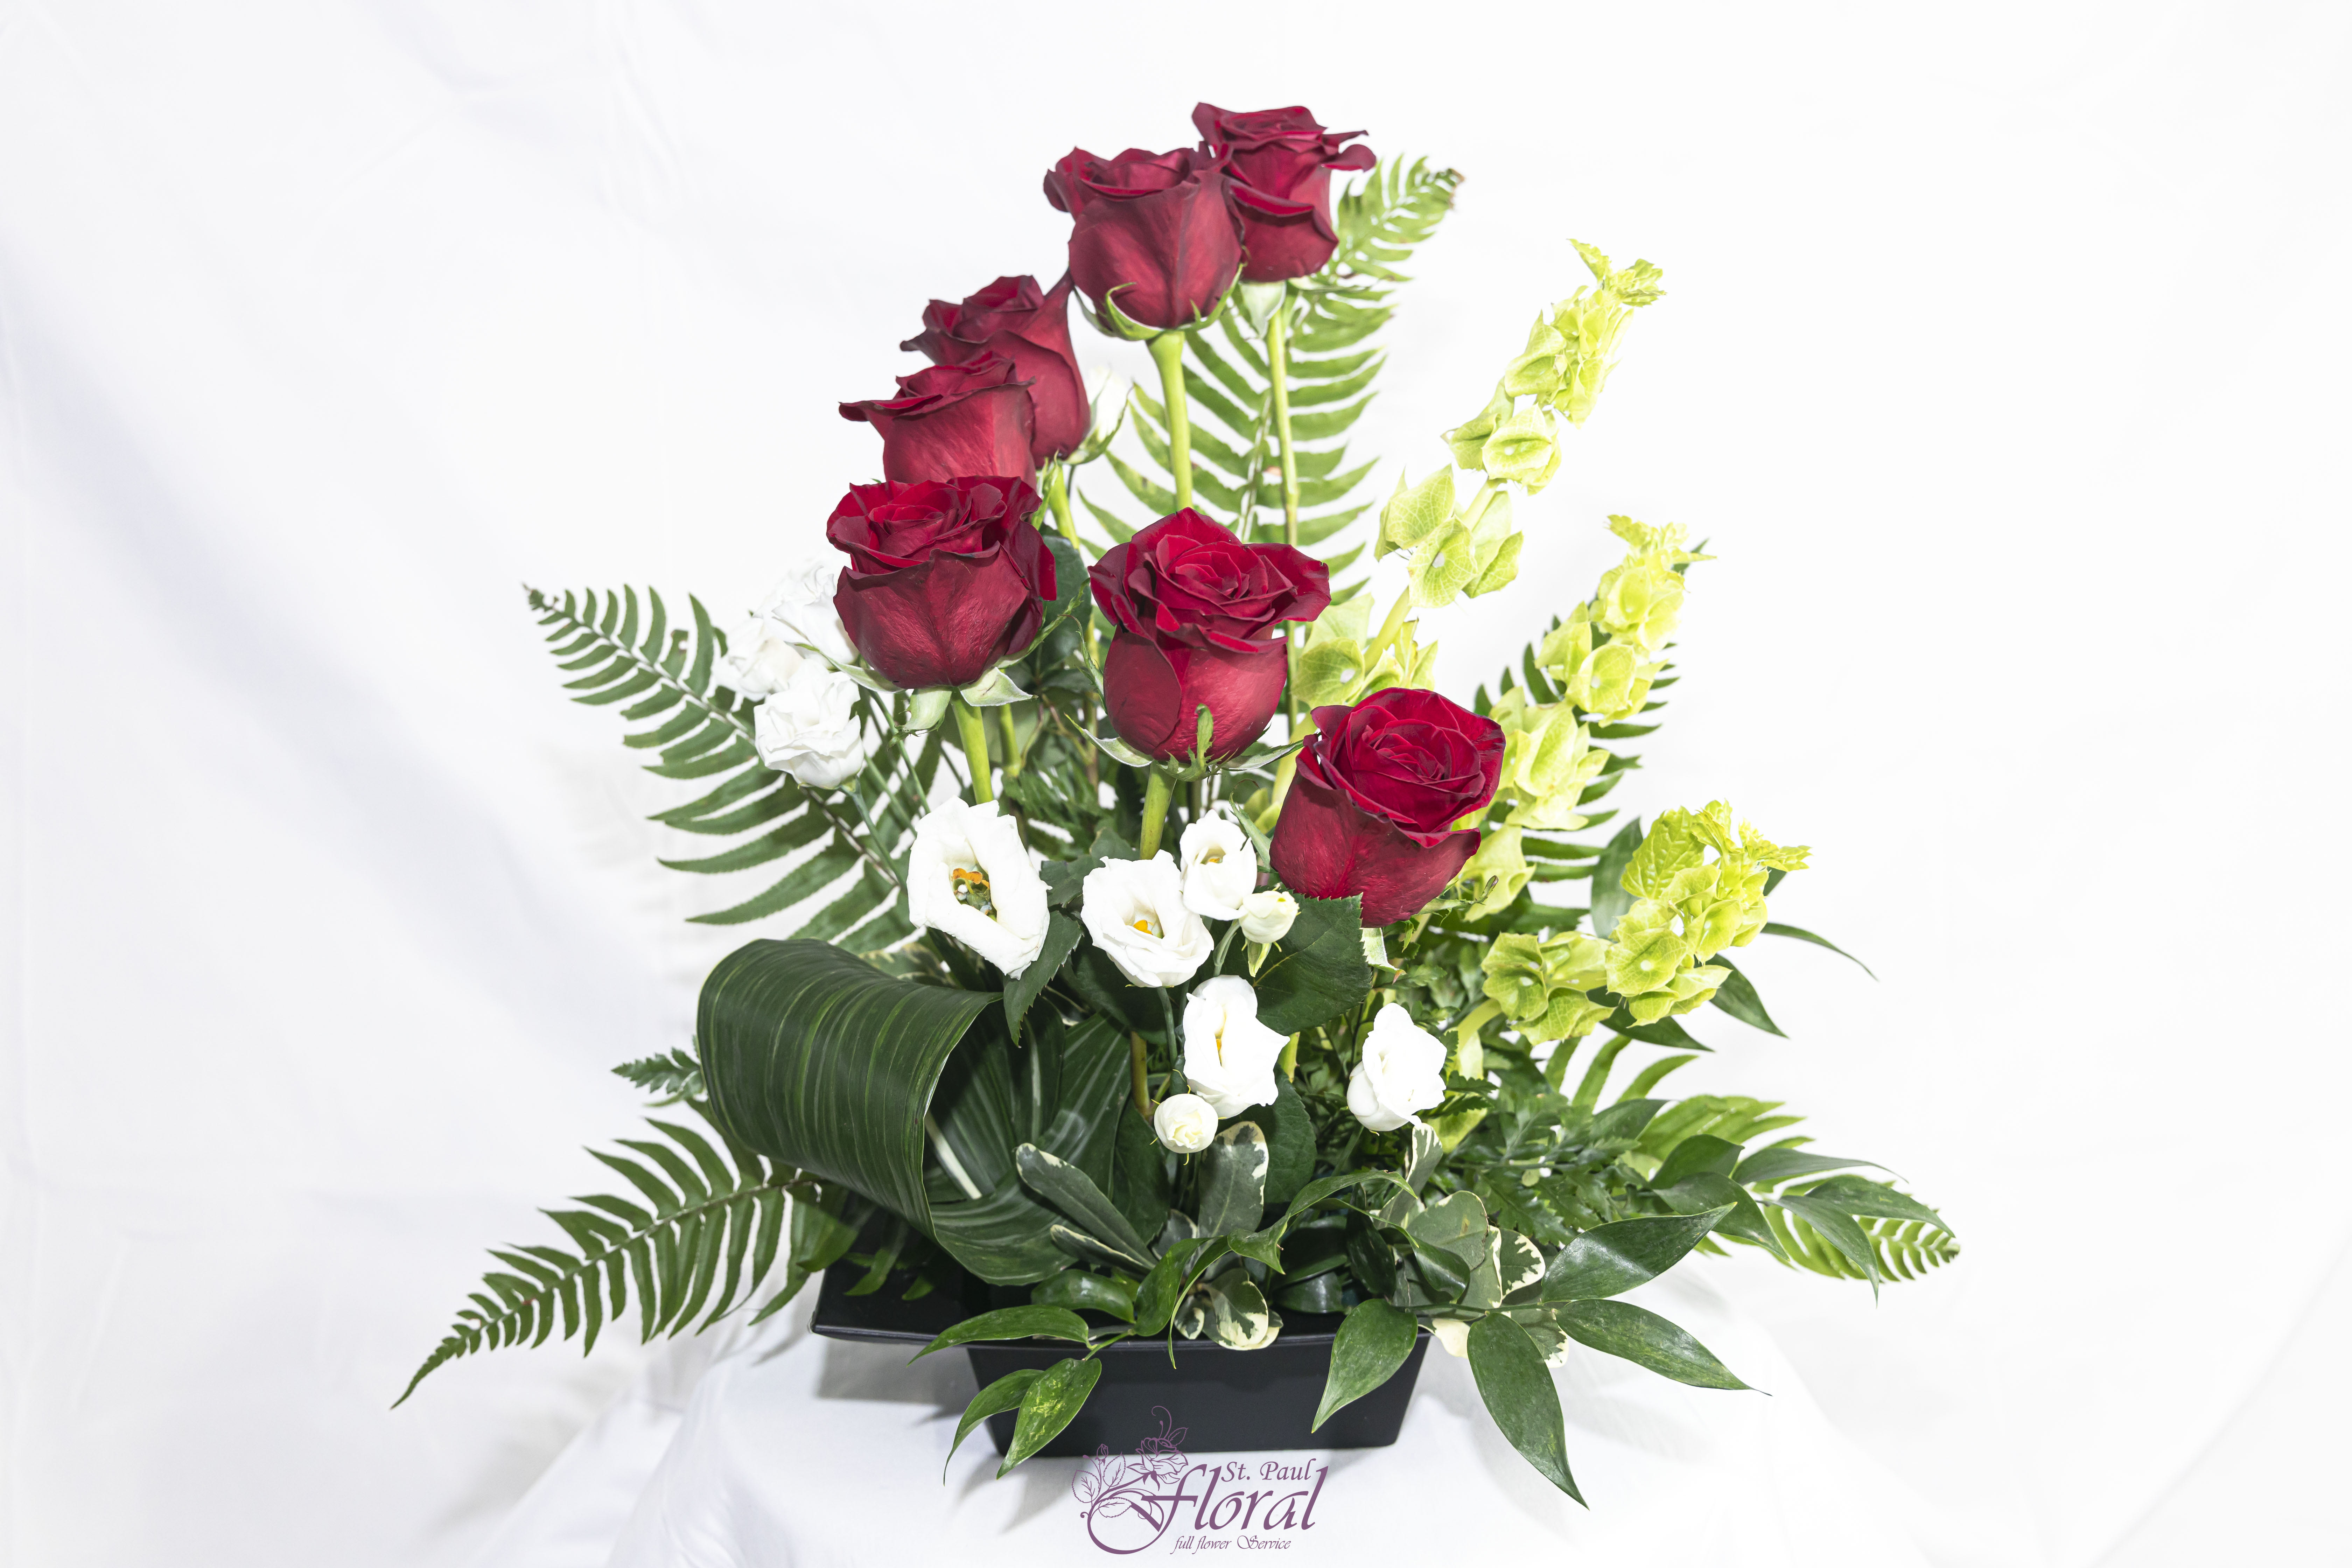 Growing Love - A modern rose arrangement, show your love with this bouquet. 